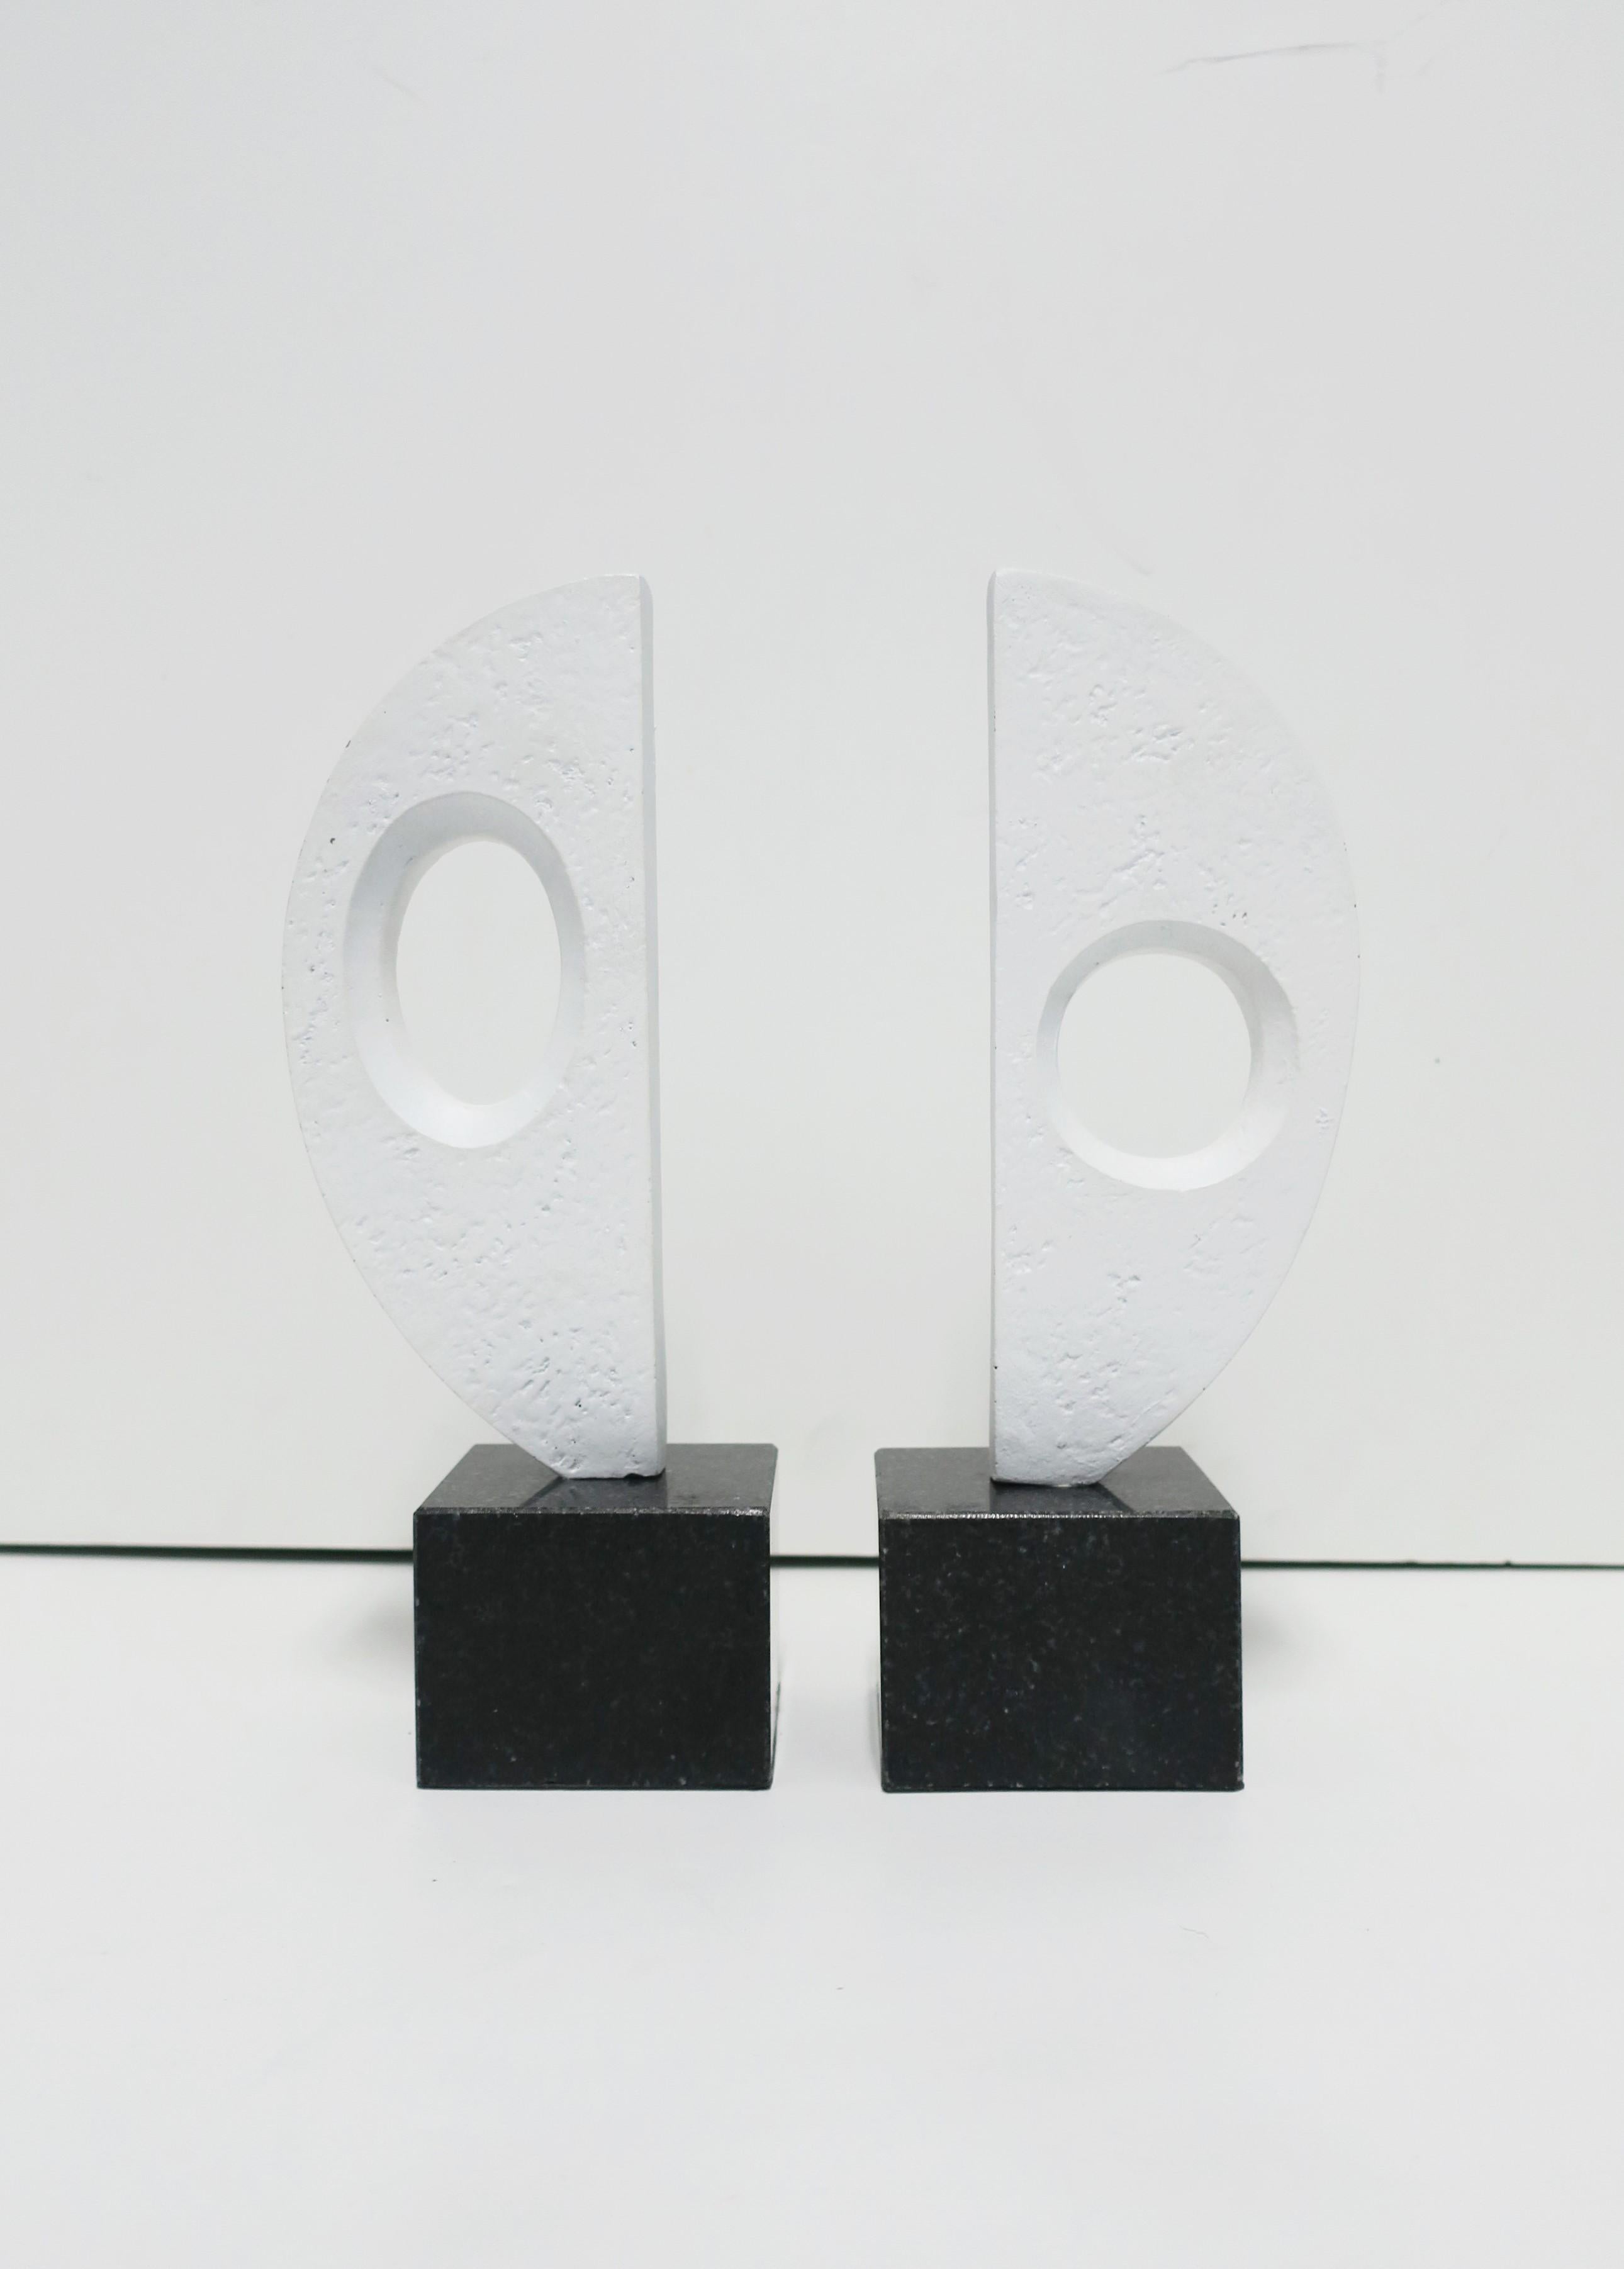 A substantial and relatively tall pair of black and white abstract sculptures decorative objects or bookends; pair are white plaster on black marble or granite bases. Demonstrated as bookends in image #6. Pair in images #3, 4 and 5 as decorative